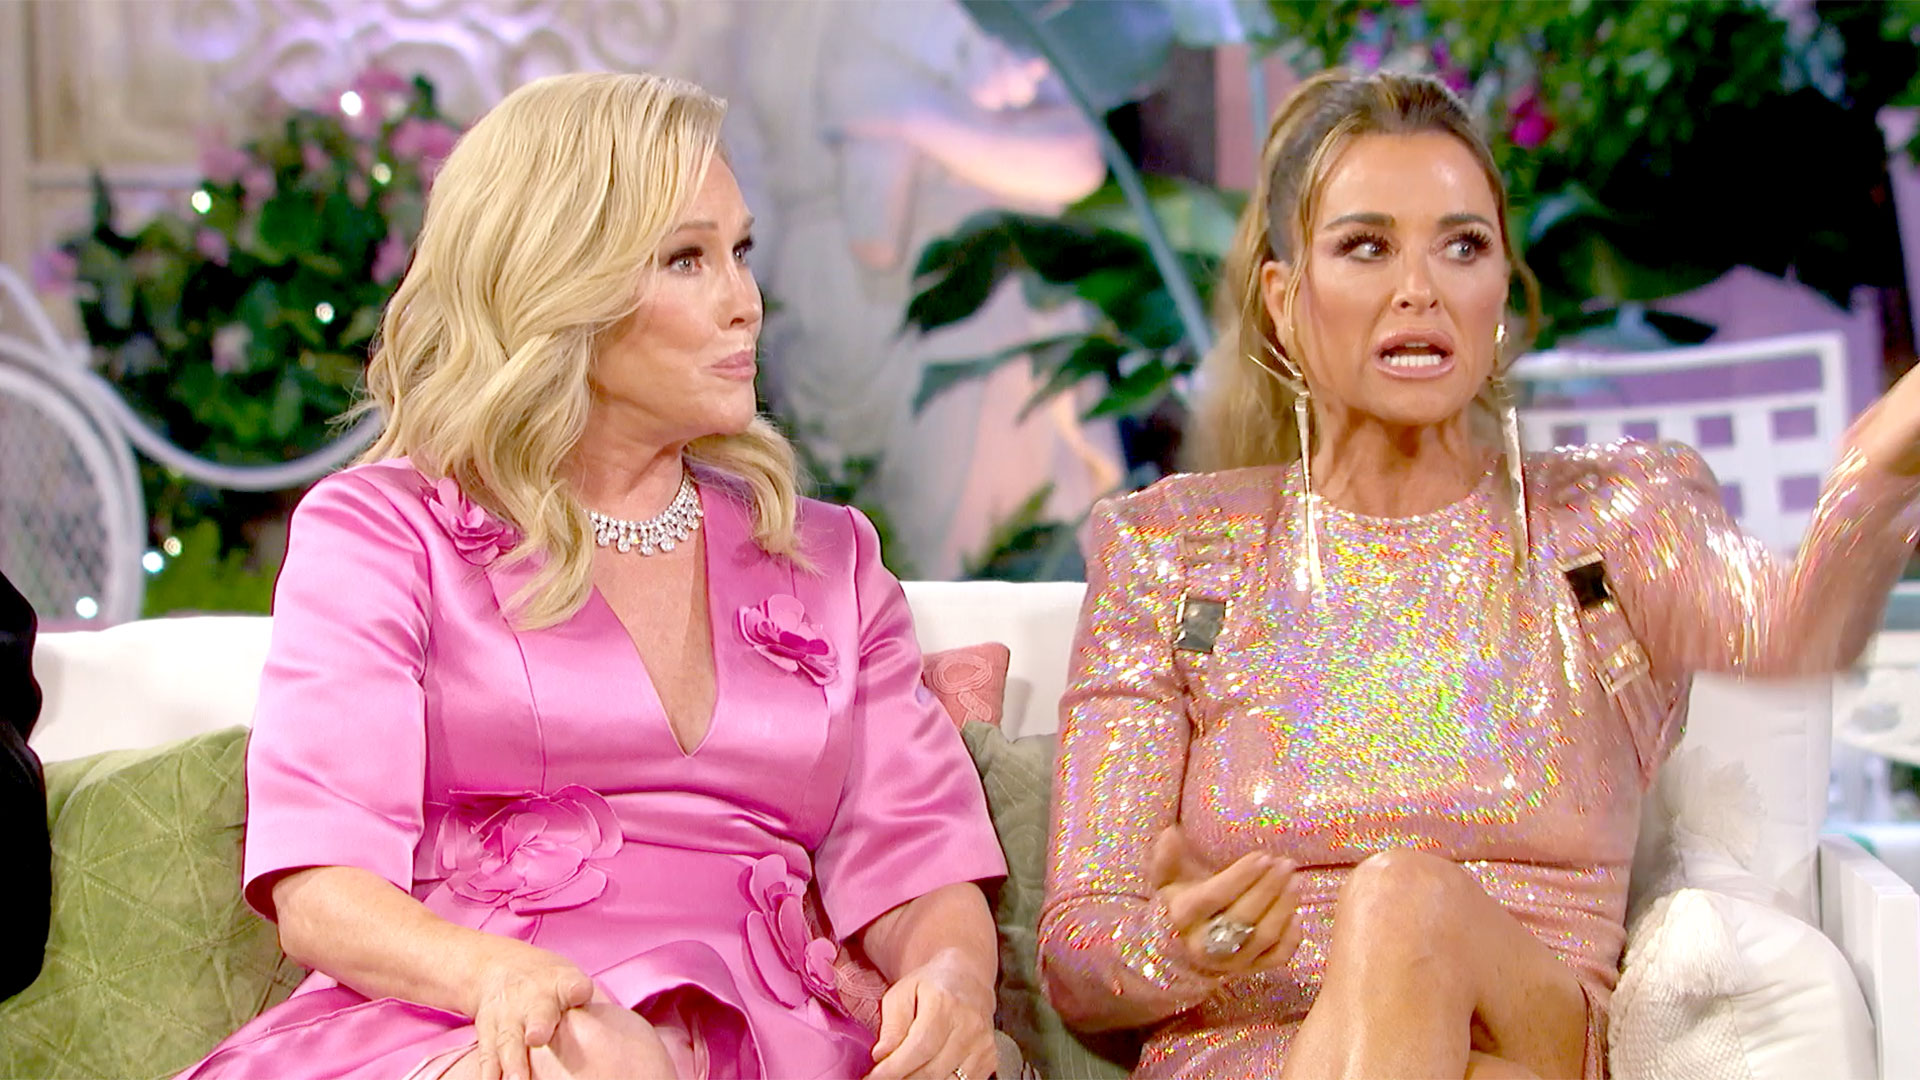 Kyle Richards says 'RHOBH' reunion was worse than she expected